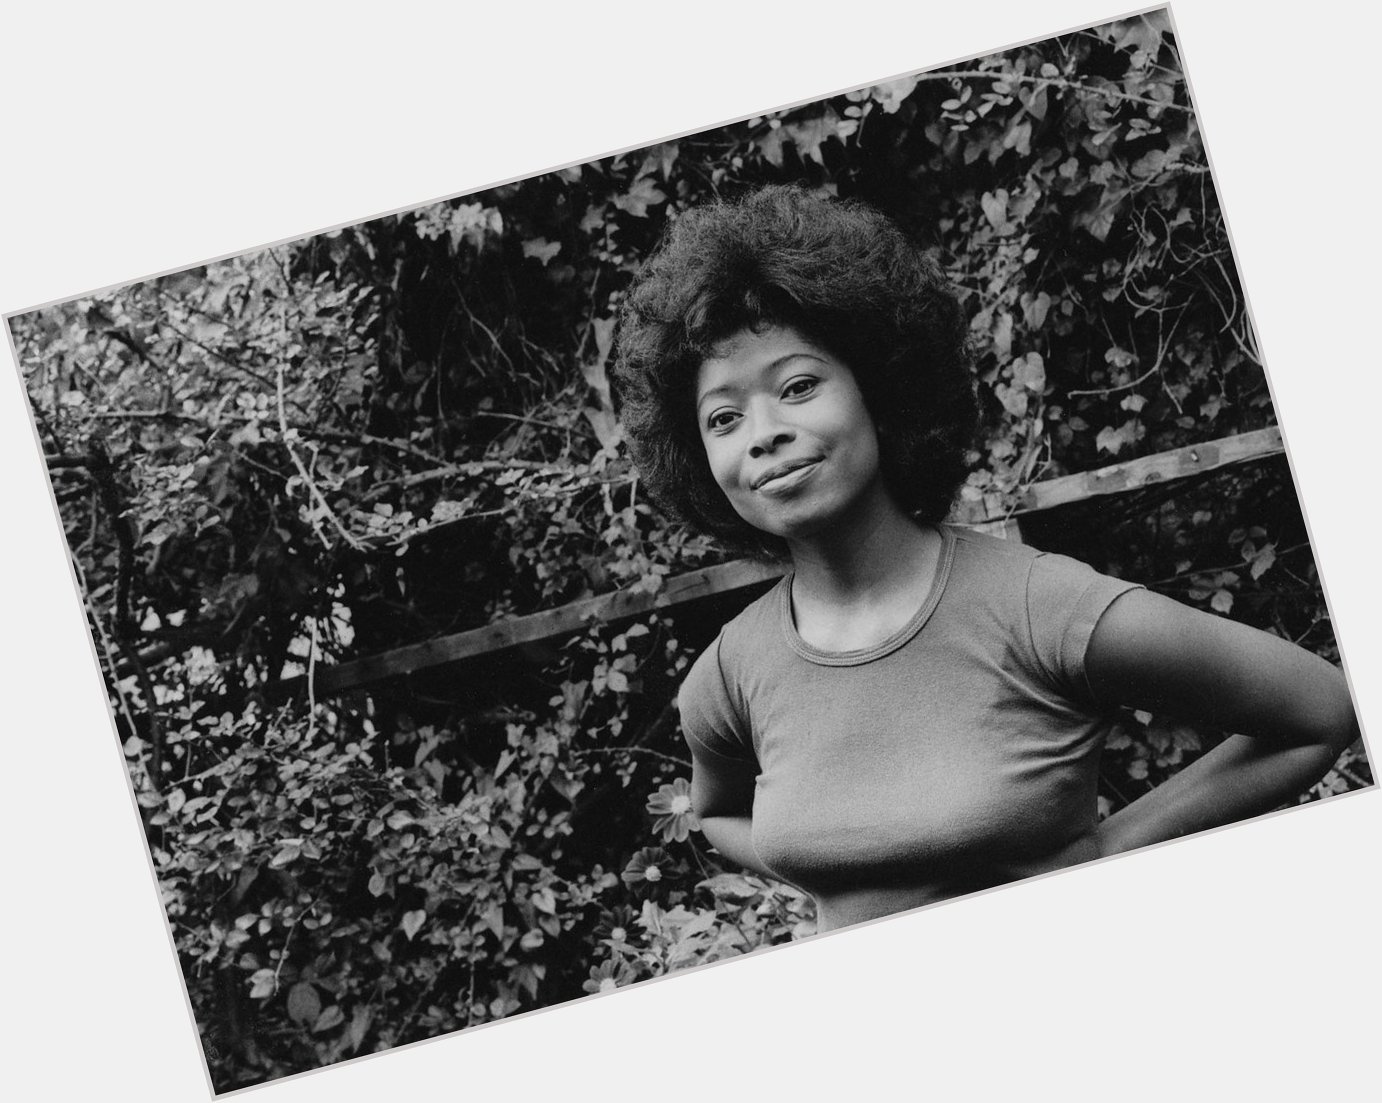  Activism is my rent for living on the planet  Alice Walker

Happy Birthday to Alice Walker. 